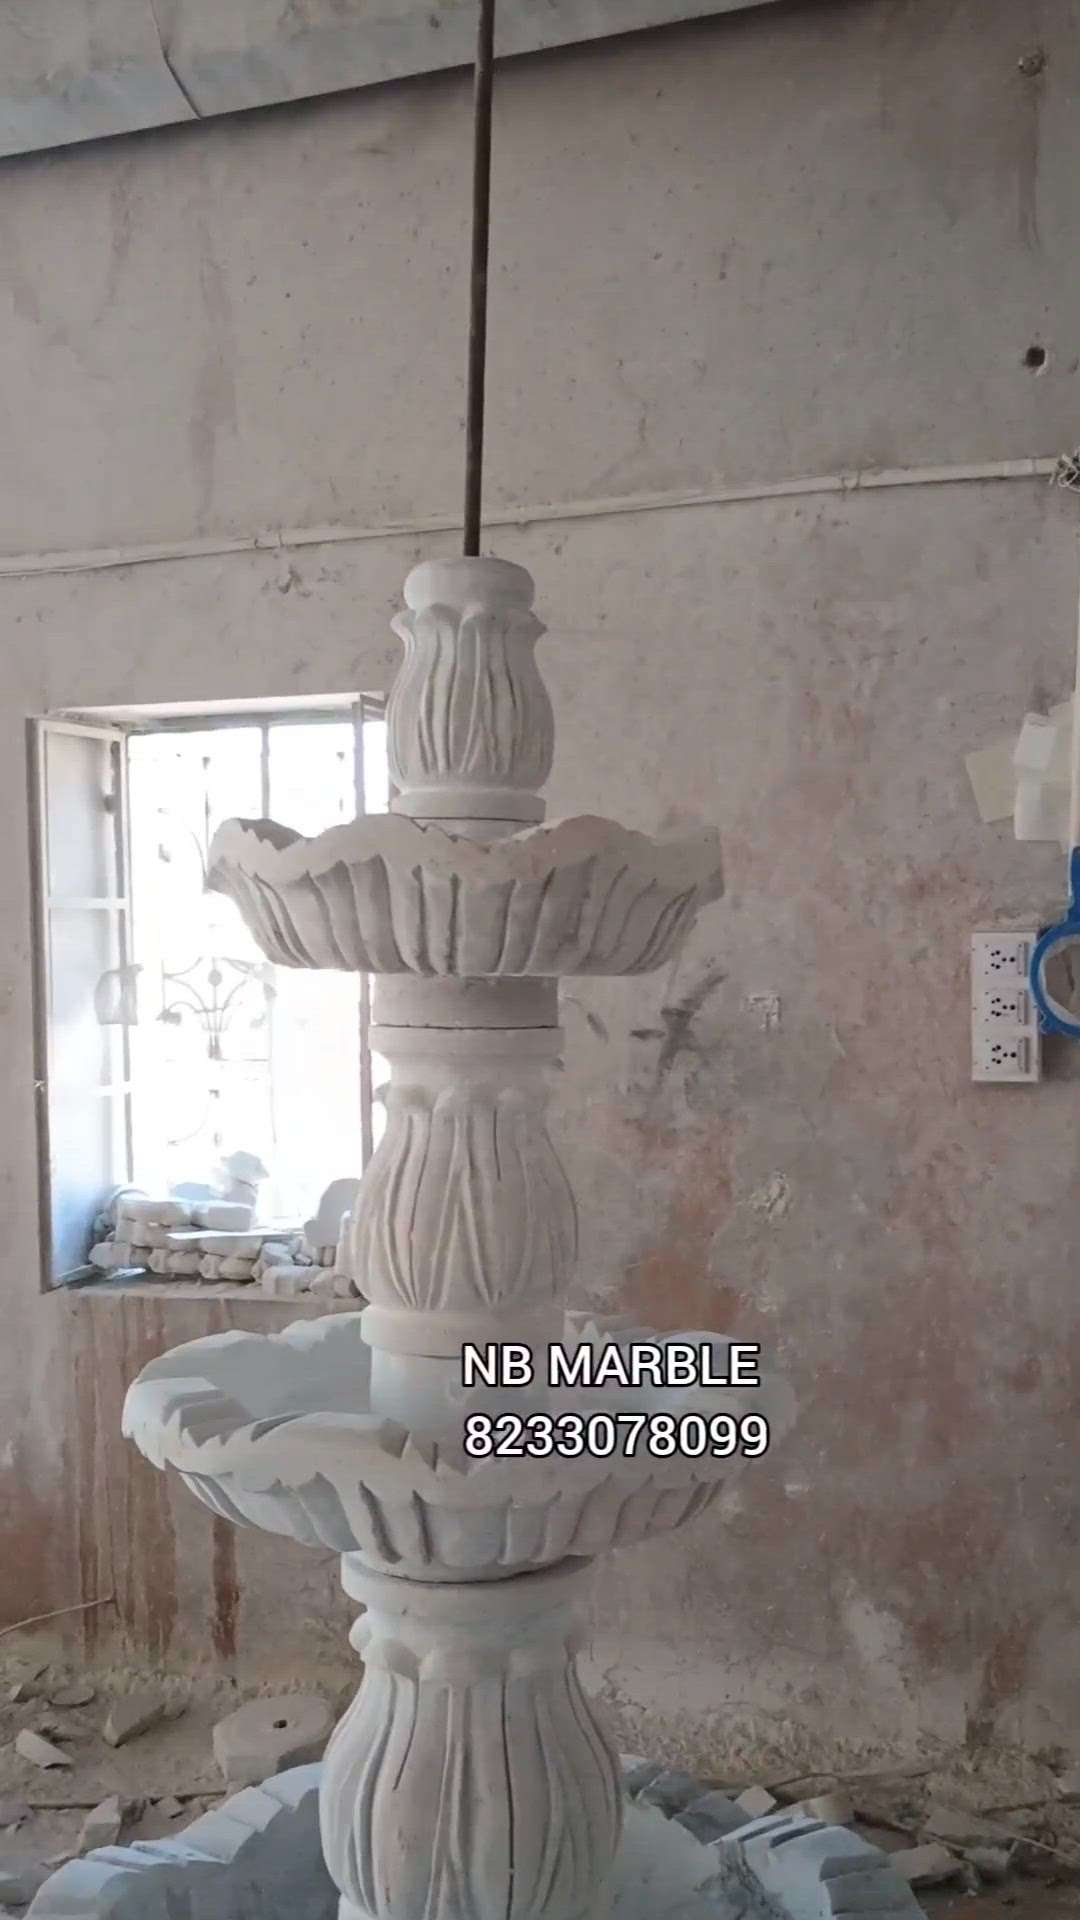 Marble Fountain

Decor your garden with beautiful fountain

We are manufacturer of marble and sandstone fountain

We make any design according to your requirement and size 

Follow me @nbmarble

More information contact me
8233078099

#fountain #MarbleFountain #waterfalls #waterfountain #nbmarble #landscape #interior #homedecor